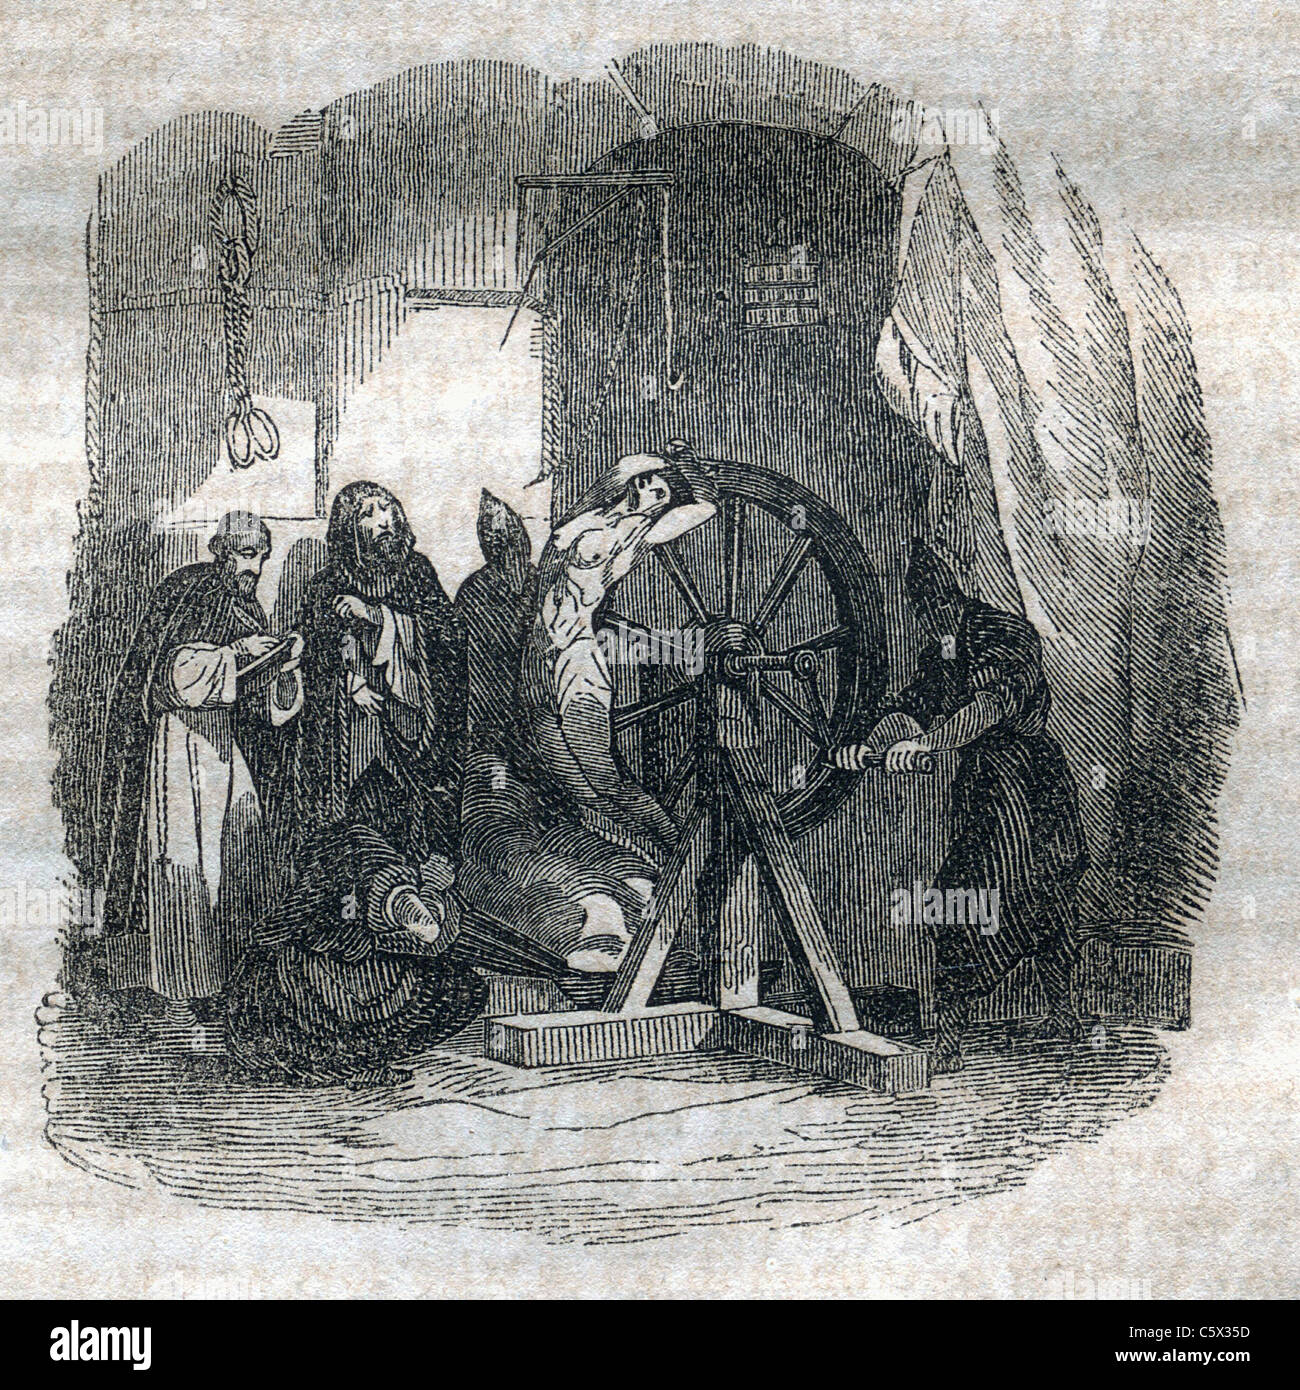 Breaking on the Wheel: Woodcut image from antiquarian book, Mysteries of the Inquisition, 1845 Stock Photo